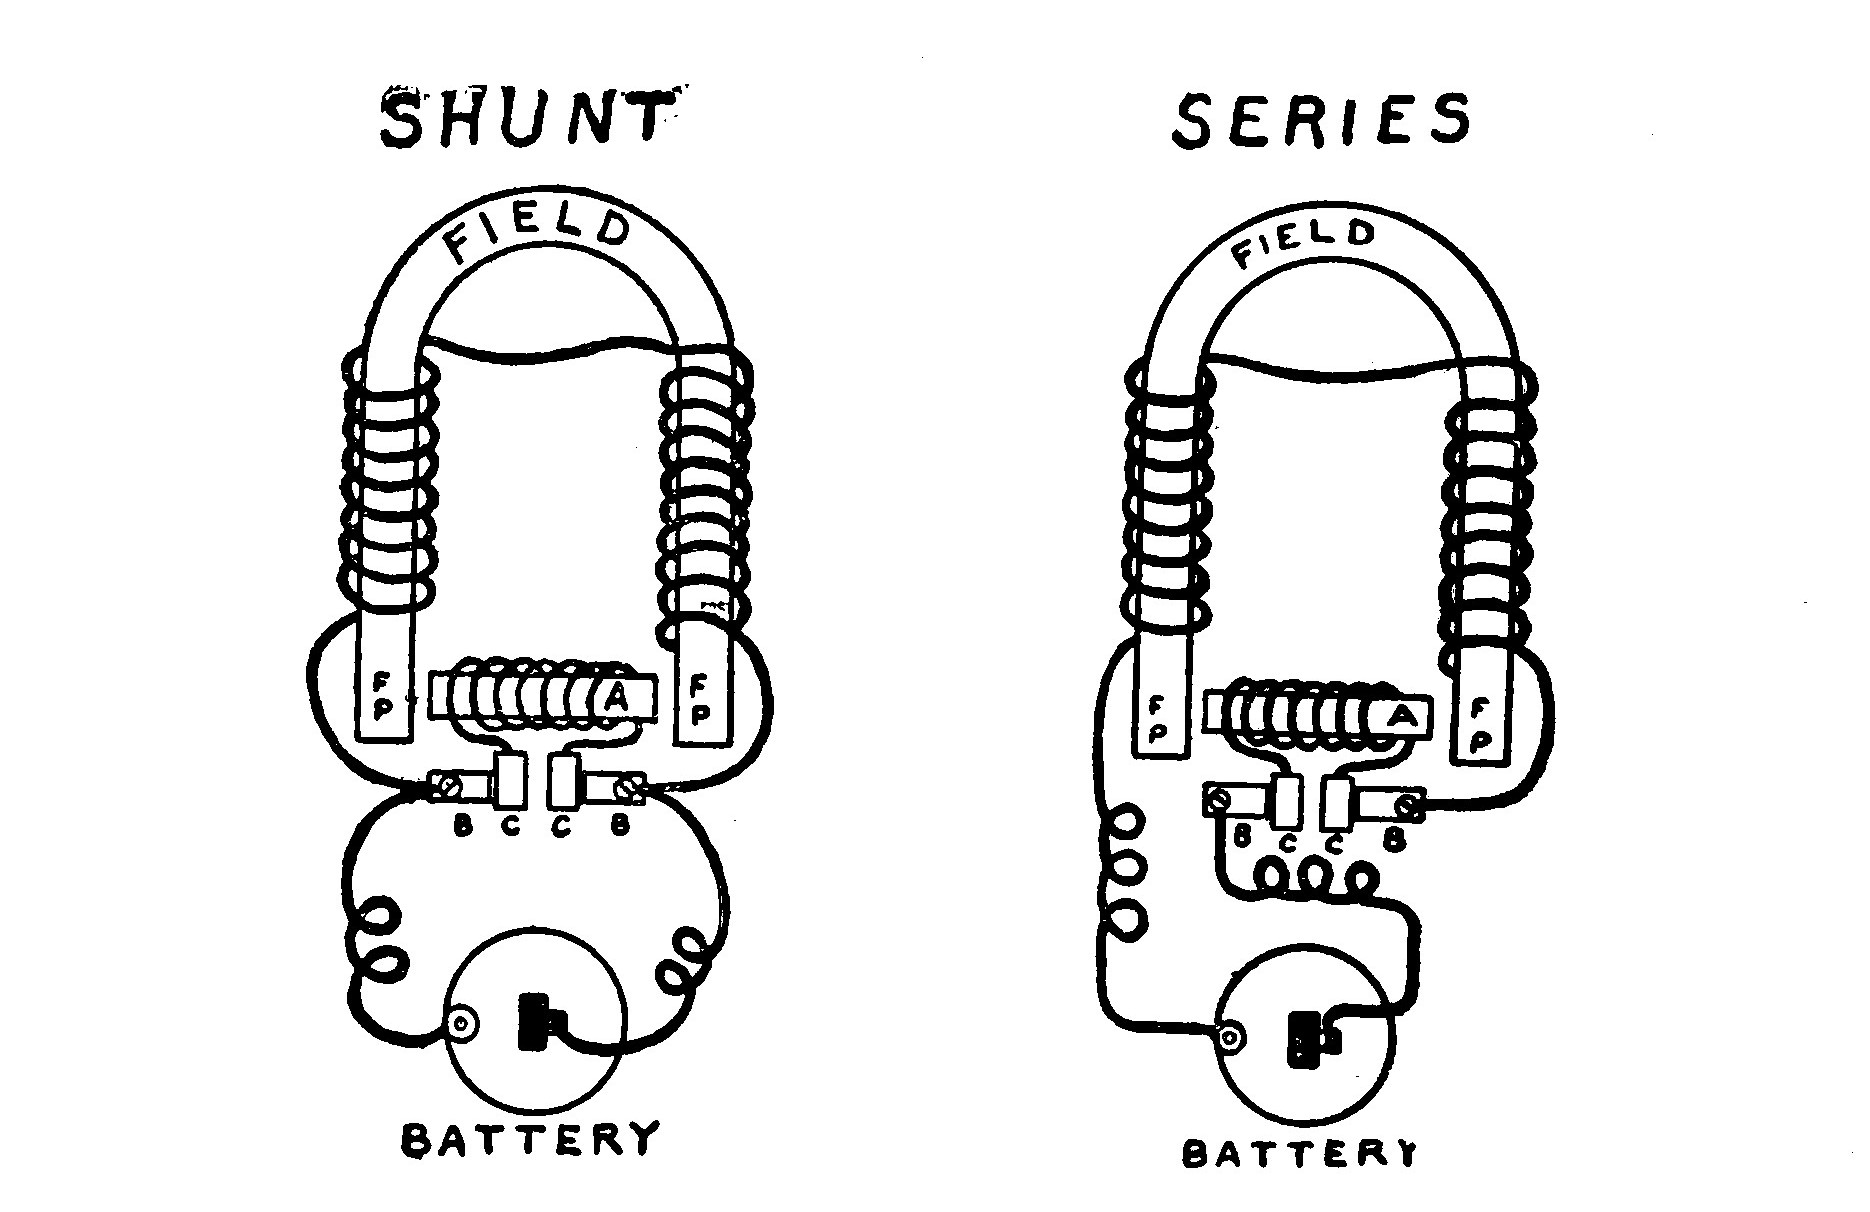 FIG. 7.—Diagrams showing the difference between a Shunt and a Series Motor.